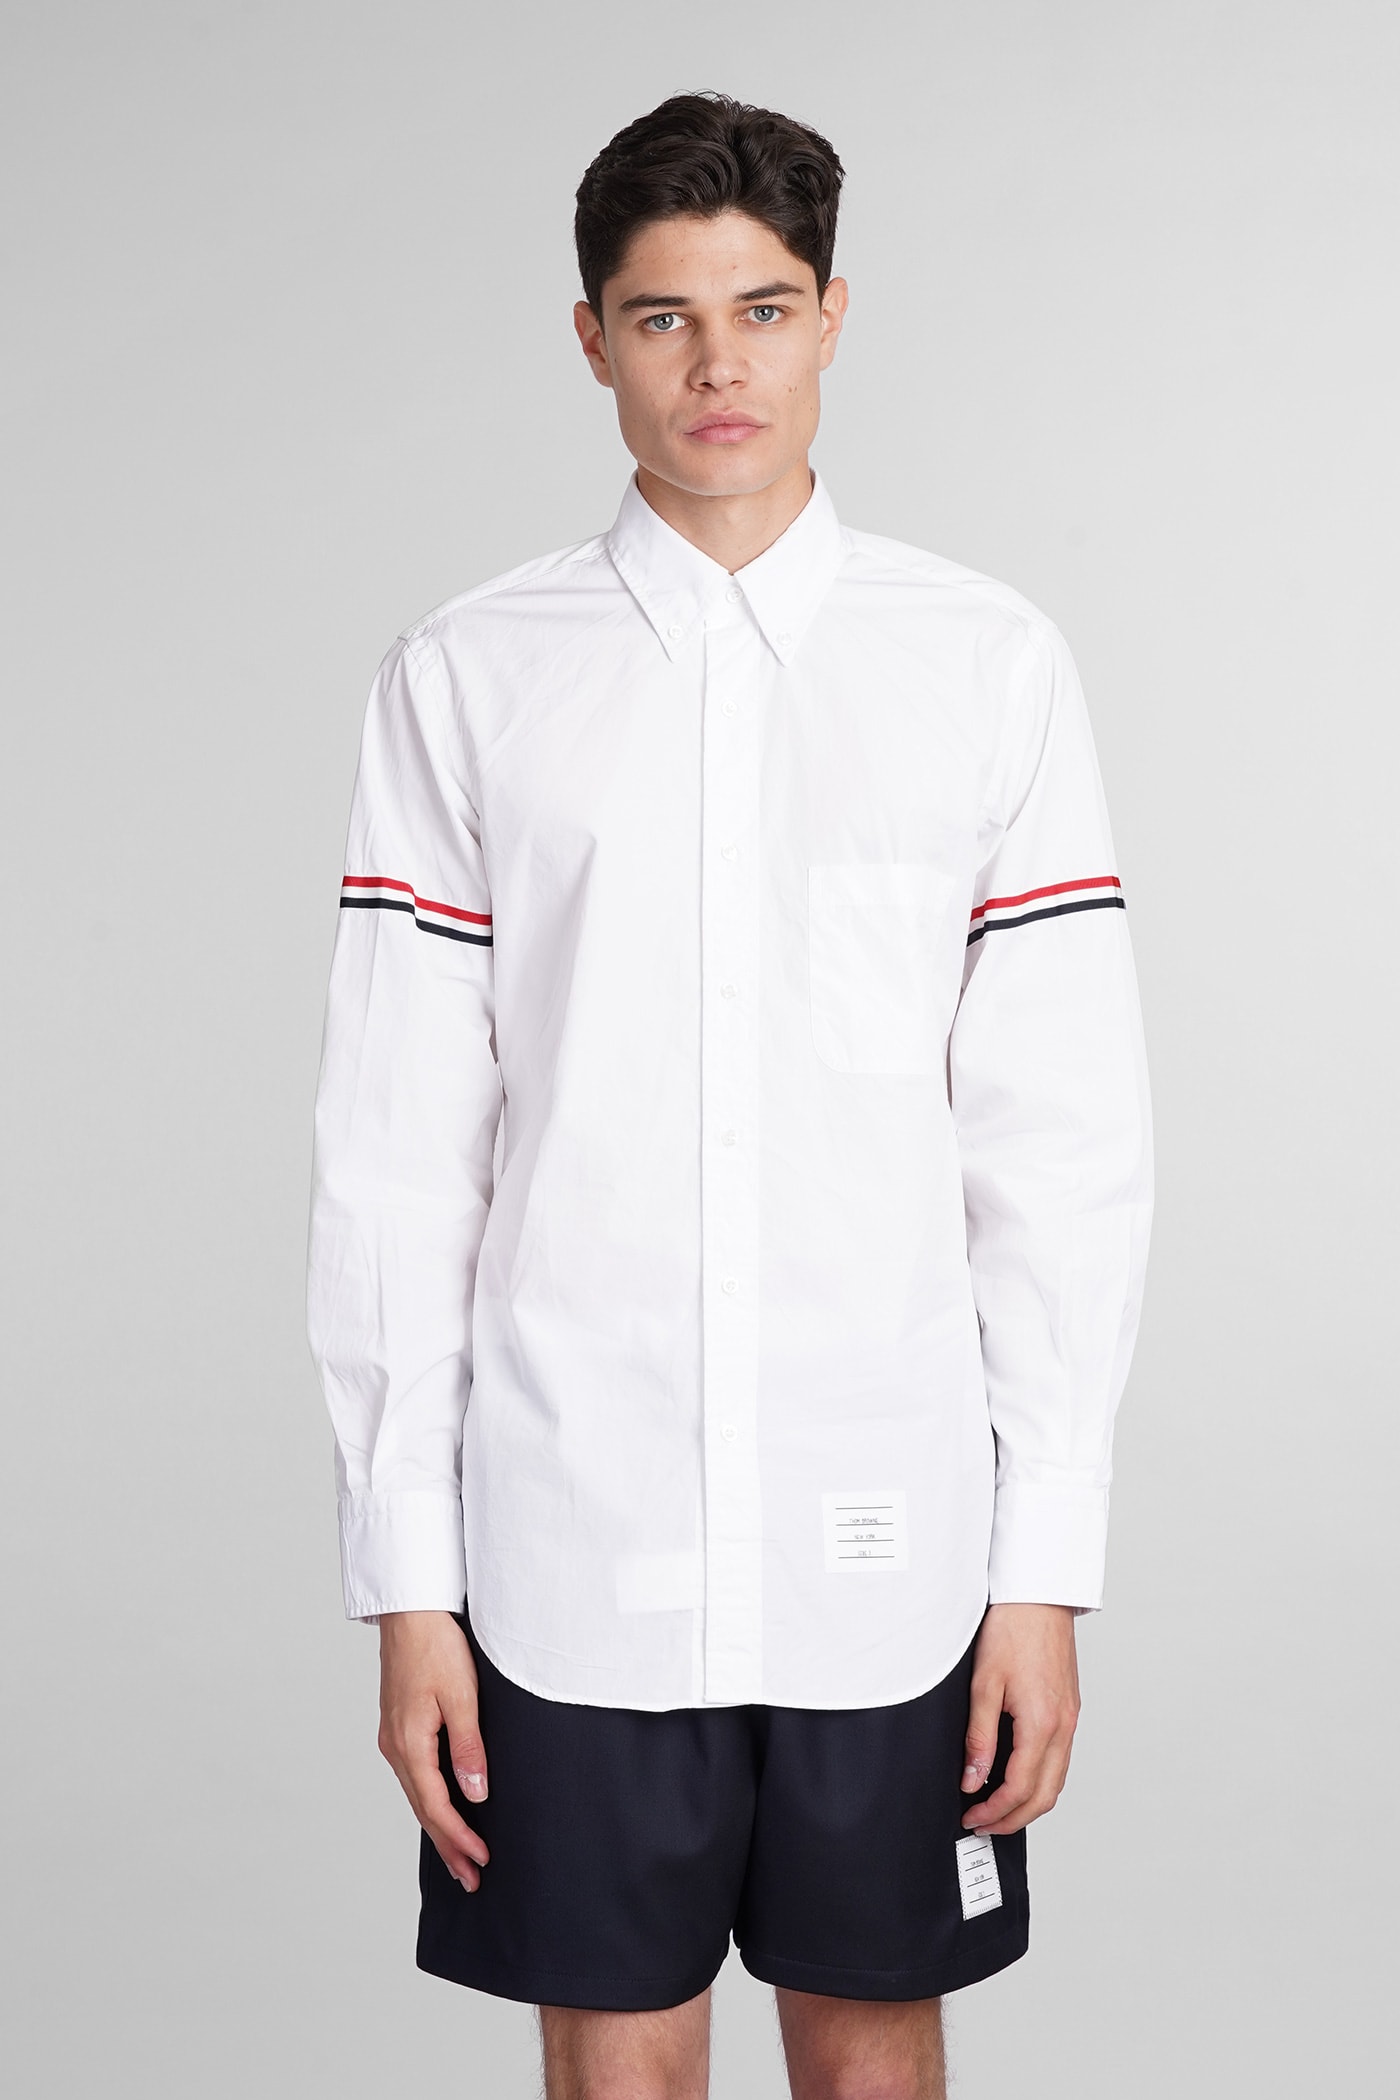 Thom Browne Shirt In White Cotton